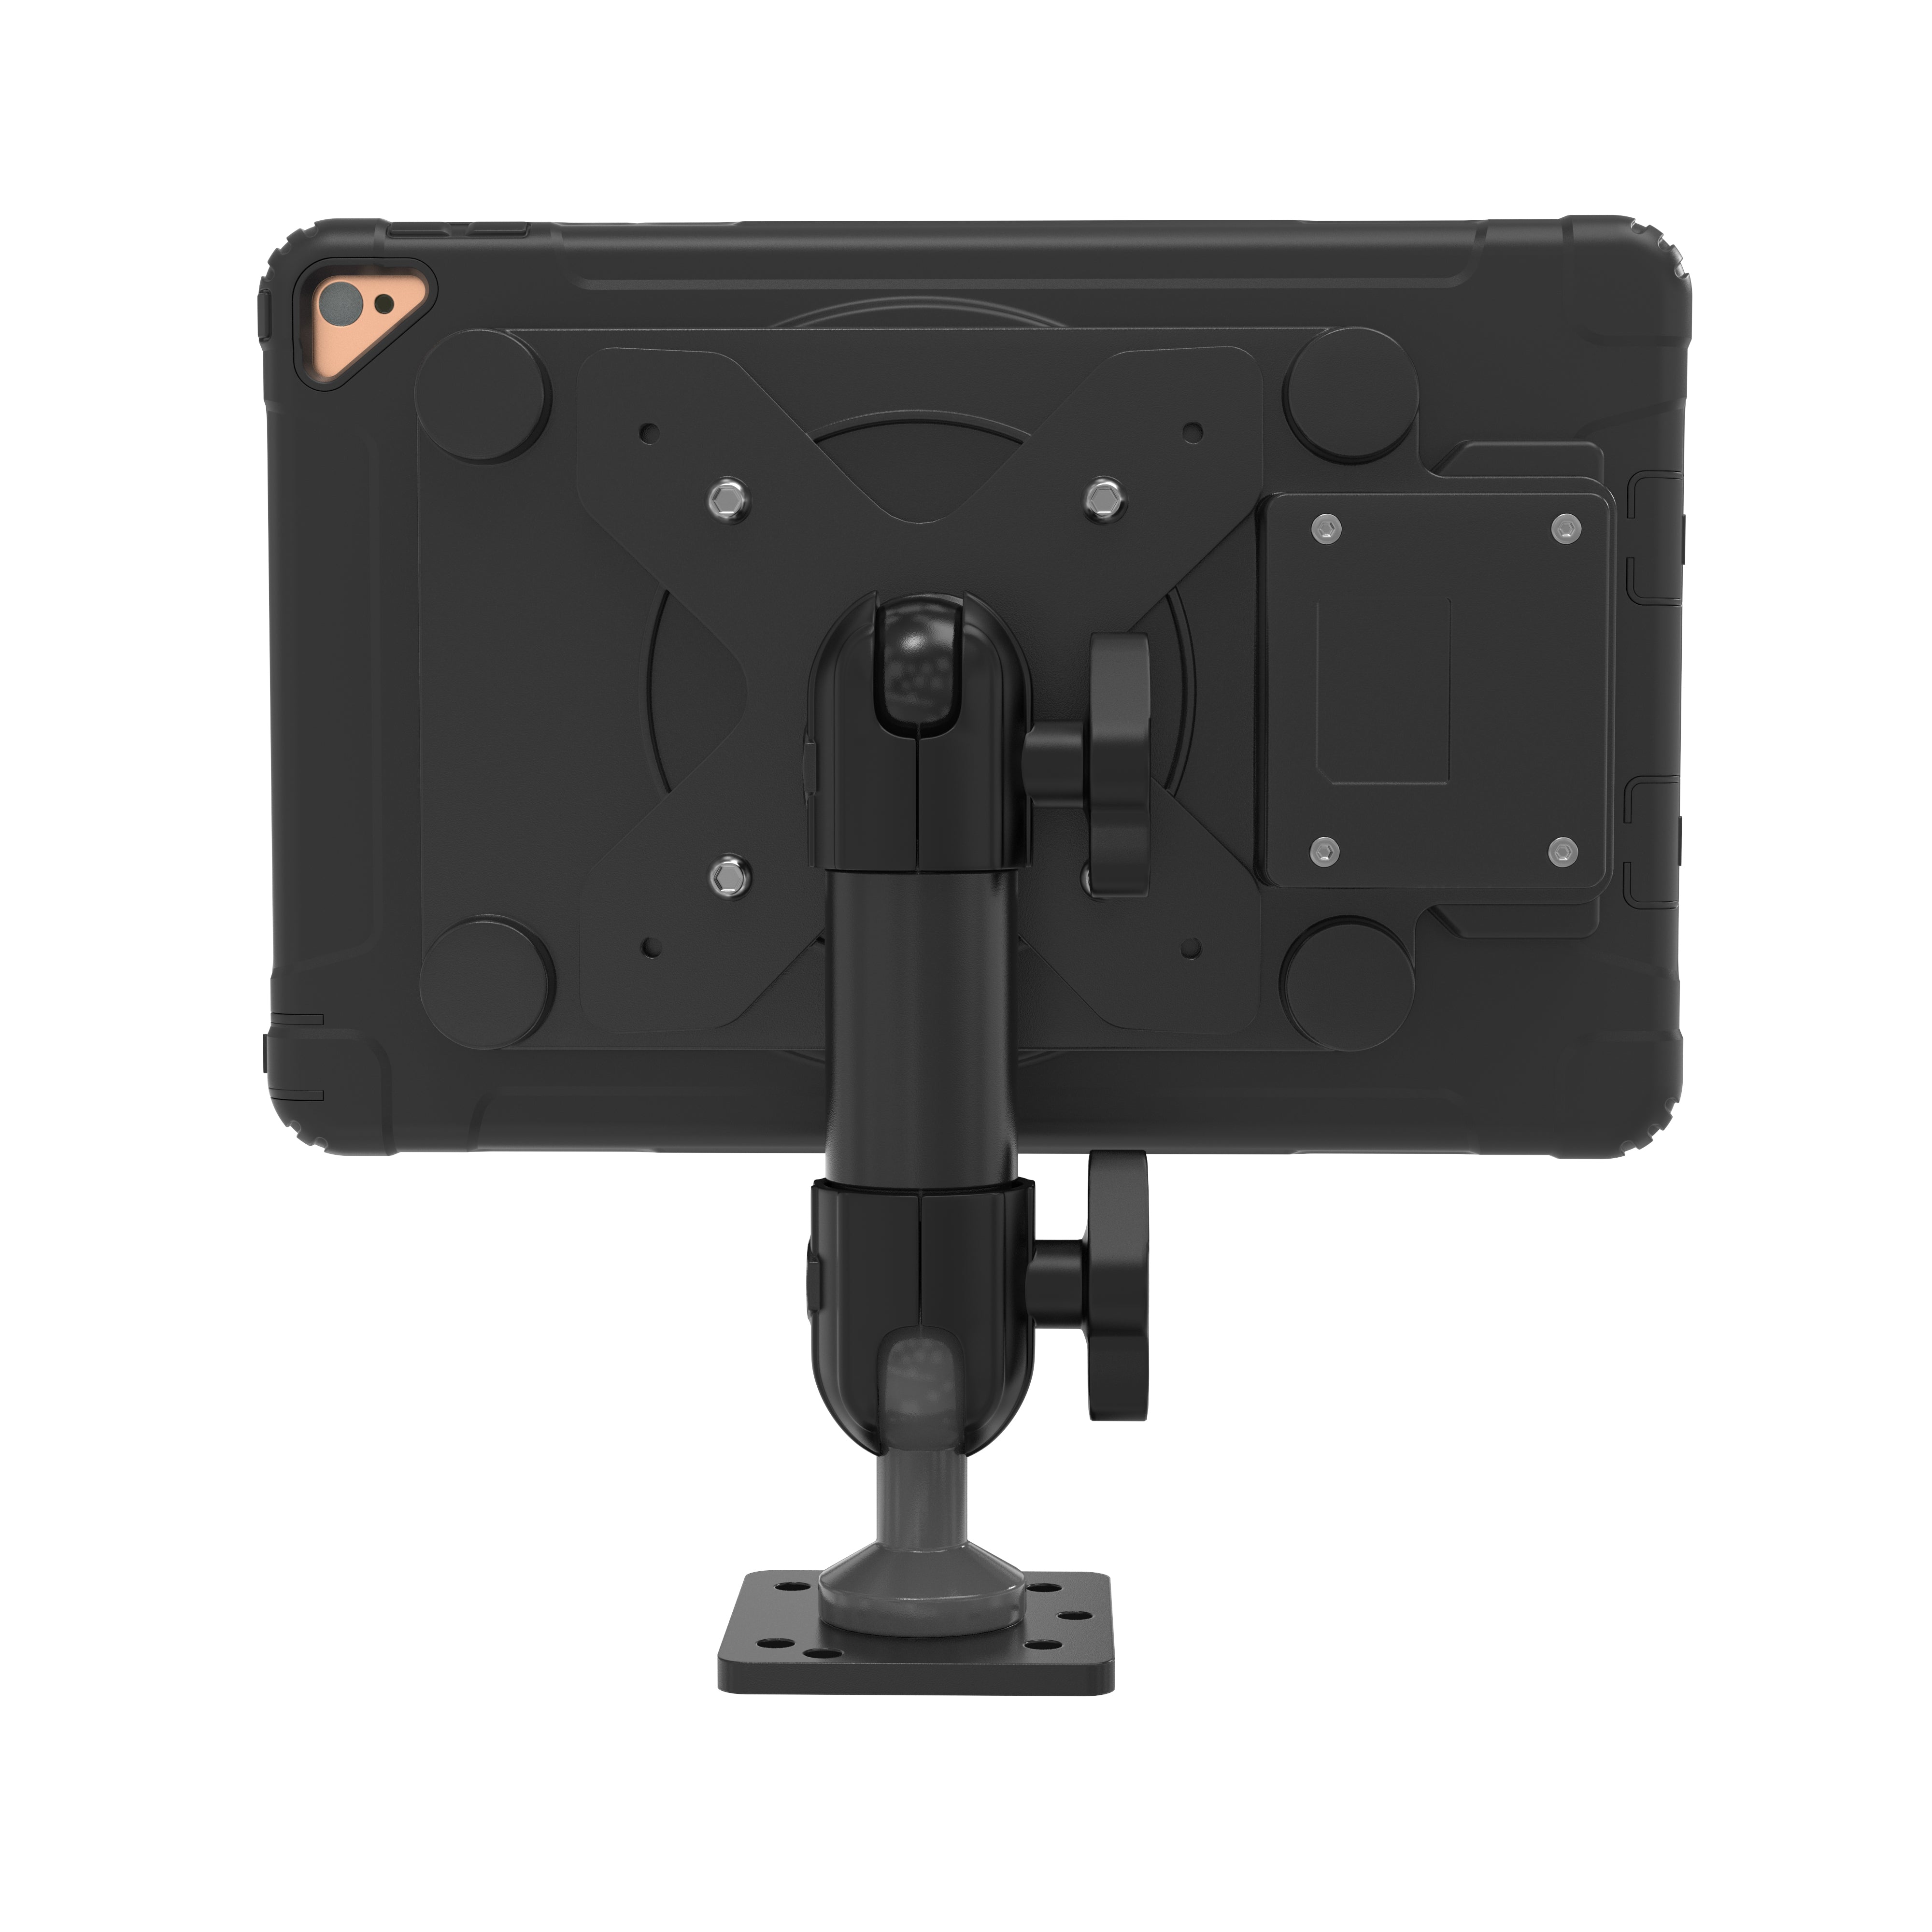 Vehicle Dash Mount Kit w/ Inductive Charging Case for iPad 10.2 inch 7th/ 8th/ 9th Gen, iPad Pro 10.5 inch and iPad Air 3 and more